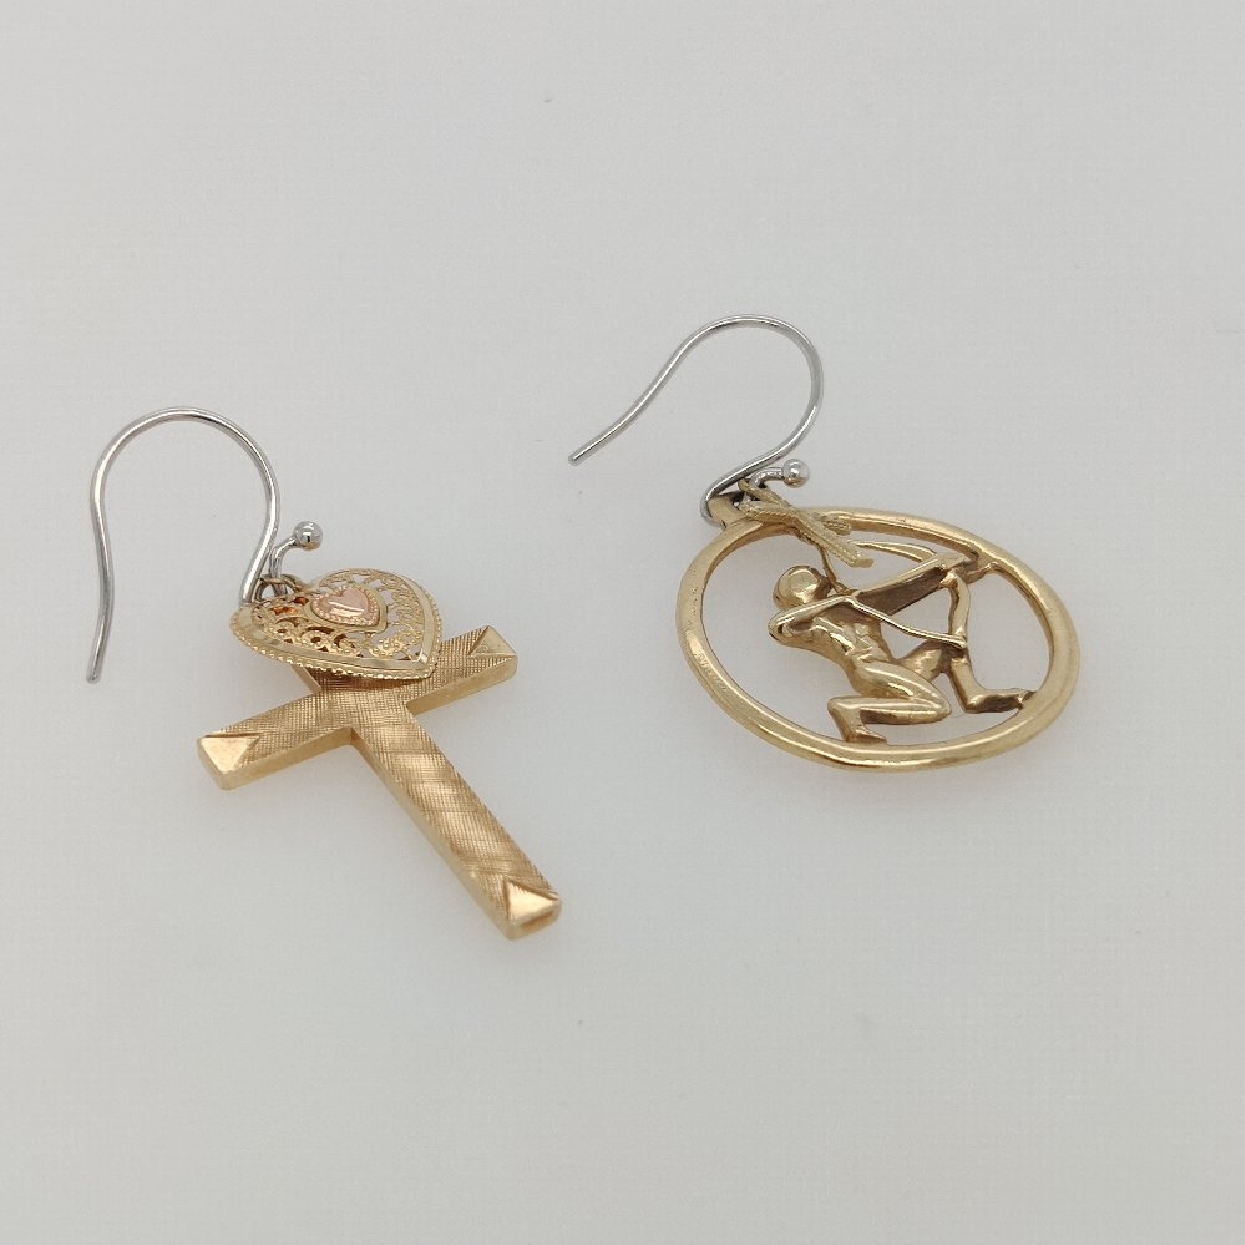 14K Yellow Gold Asymmetrical Religious Earrings With Cross; Heart and Archer Details on 18K White Gold Etruscan Style Ear Wires